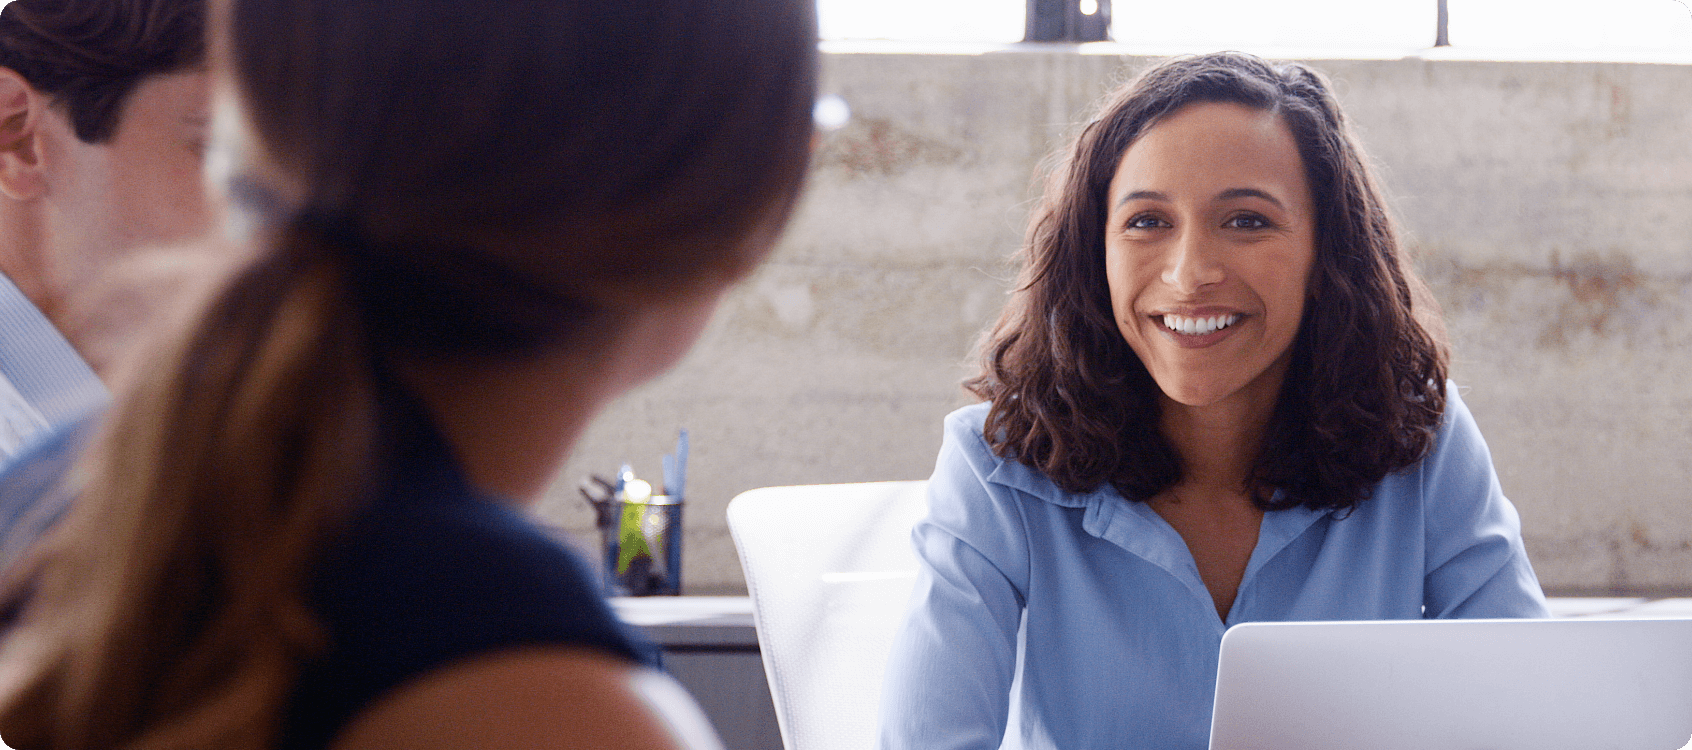 Woman smiling in meeting.